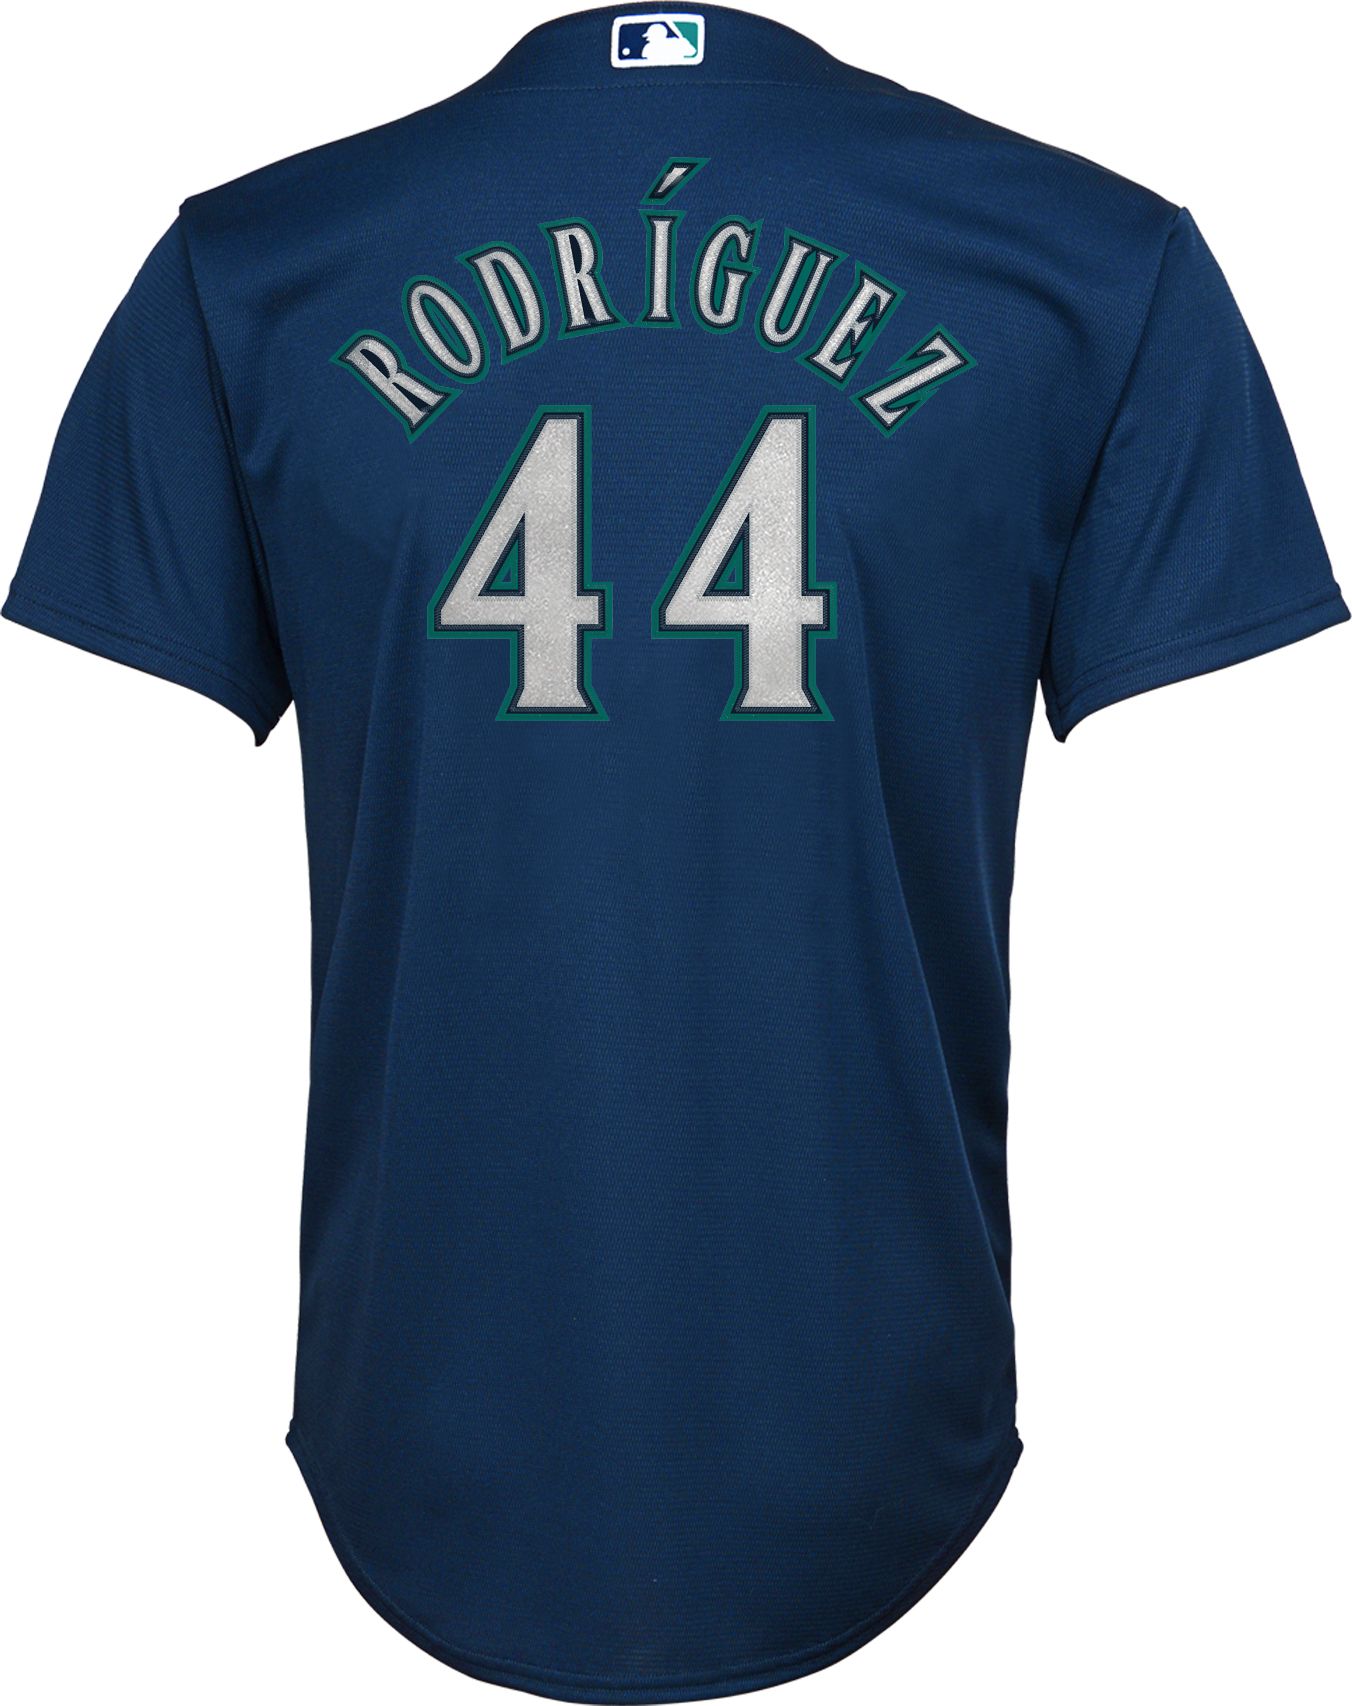 Seattle Mariners official jersey